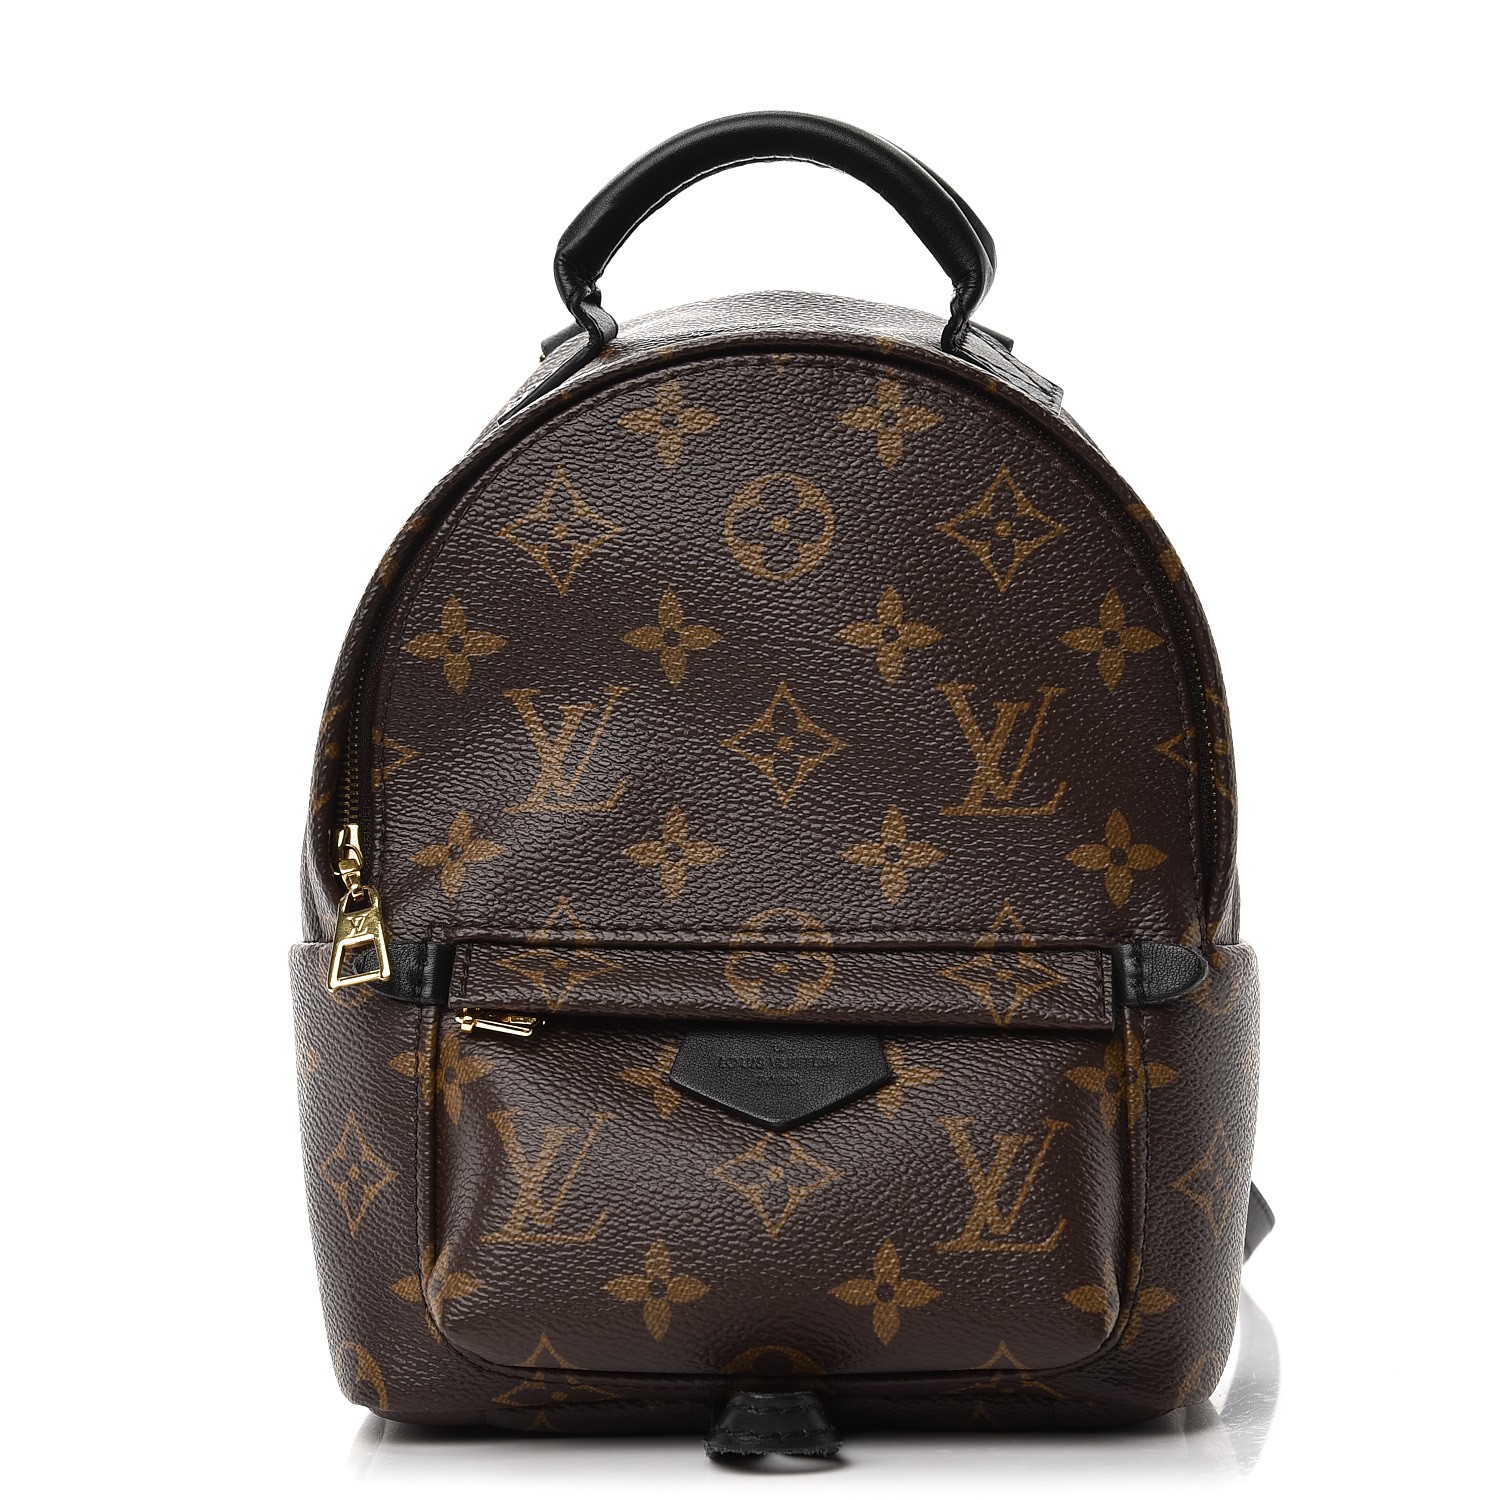 LOUIS VUITTON PALM SPRINGS MINI BACKPACK WORTH IT?, Review, Wear and Tear, What Fits